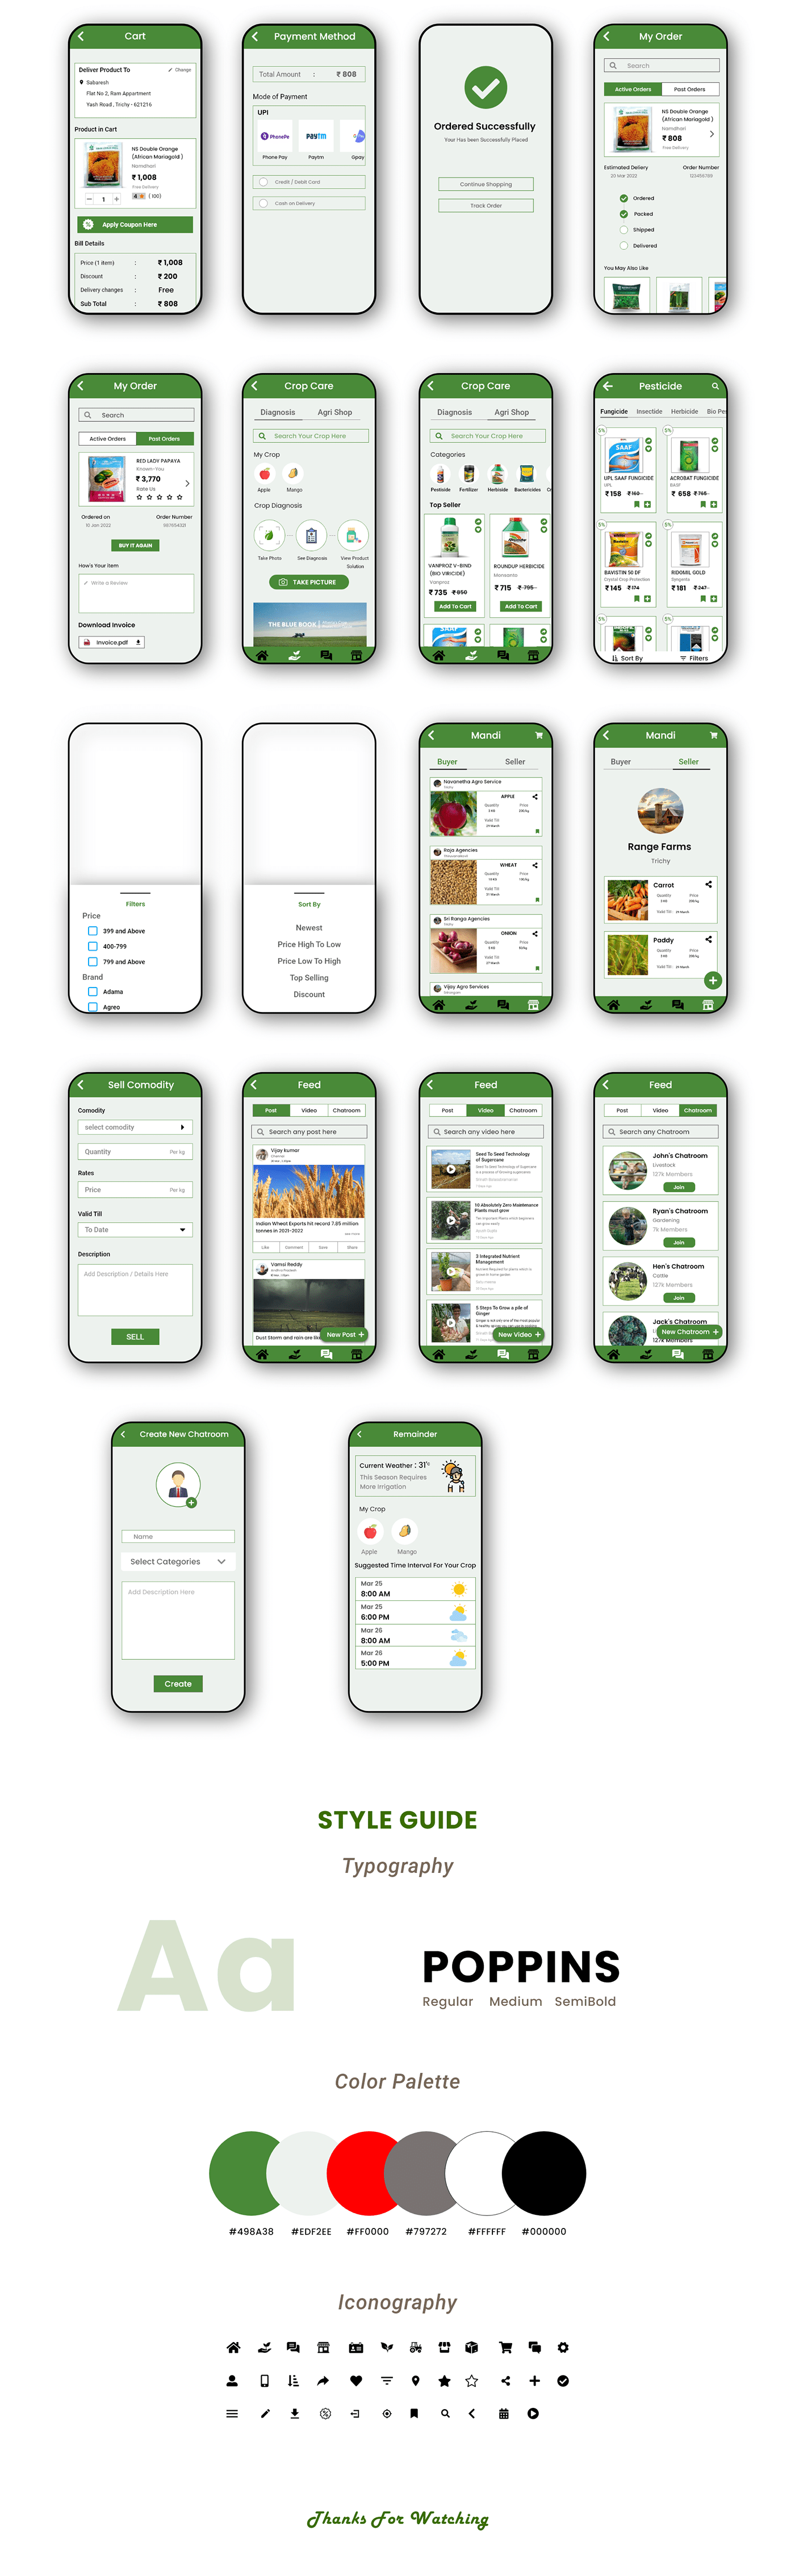 Agriculture app agritech casestudy Case Study Farming app Mobile app user experience user interface UX Case Study ux ui case study ux/ui